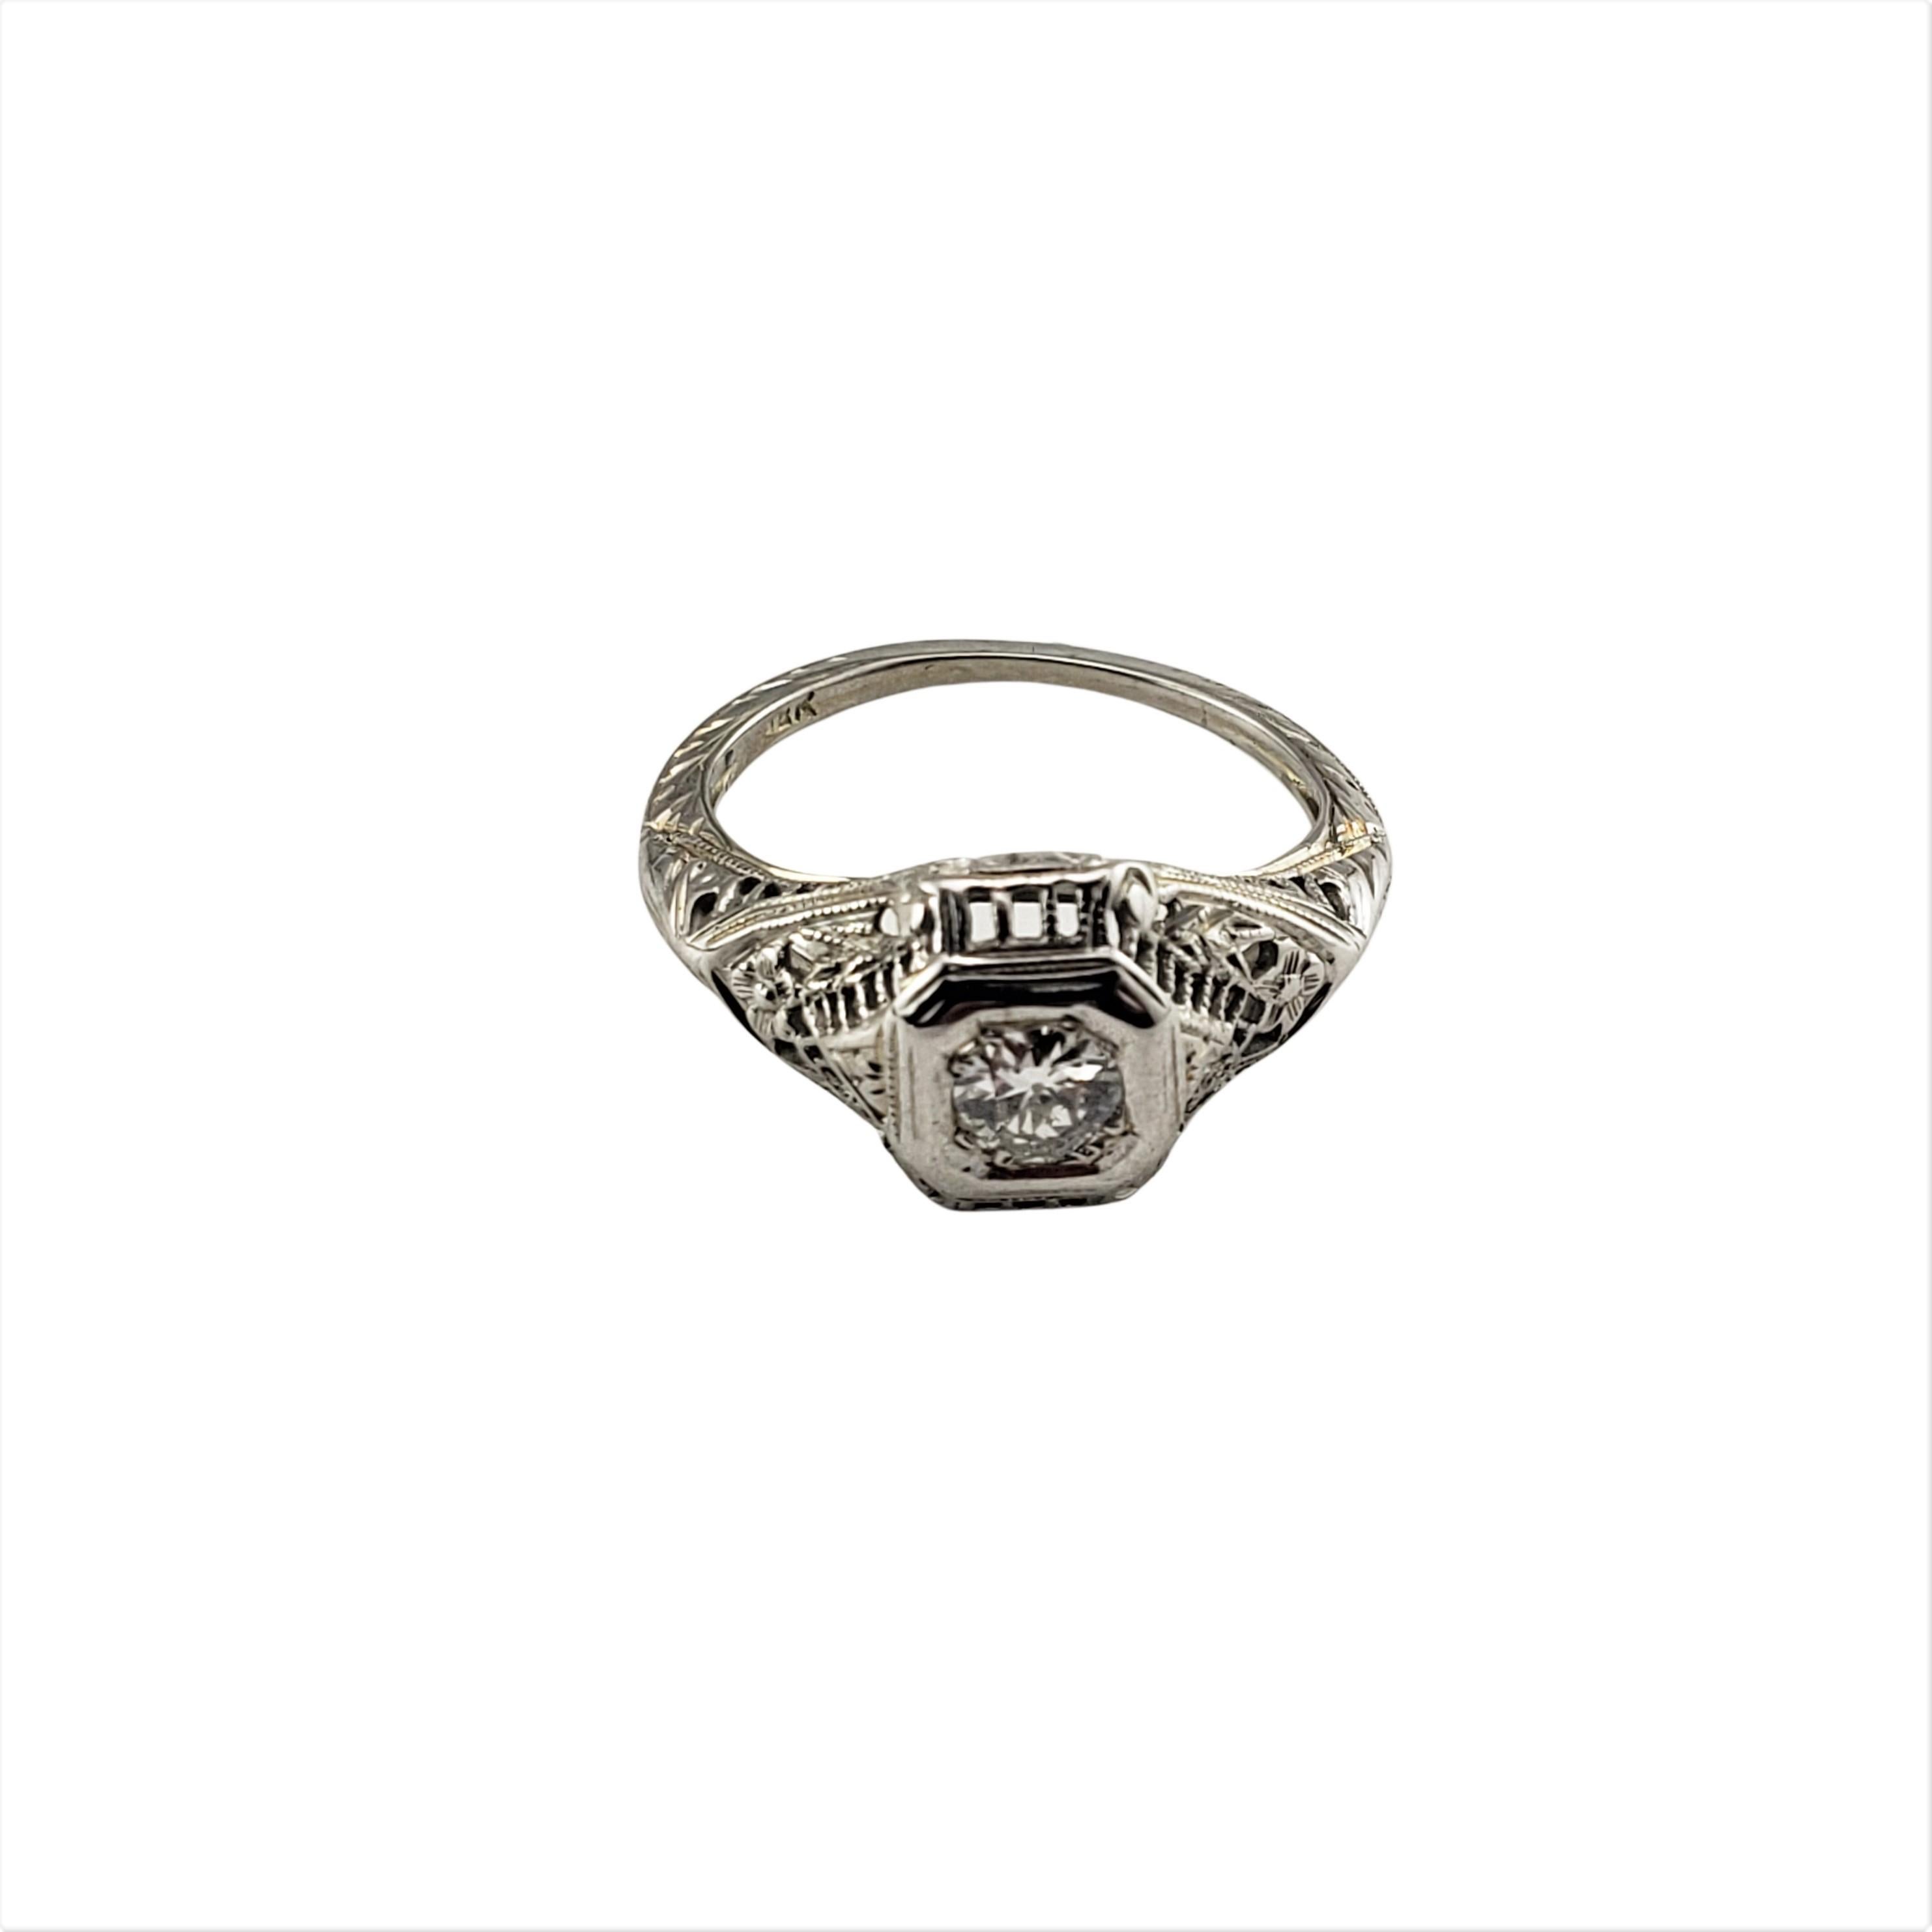 14 Karat White Gold Filigree Diamond Ring Size 4.75-

This stunning ring features one round brilliant cut diamond set in beautifully detailed white gold filigree.  Shank: 1 mm.  
Width: 10 mm.

Approximate total diamond weight:  .35 ct.

Diamond